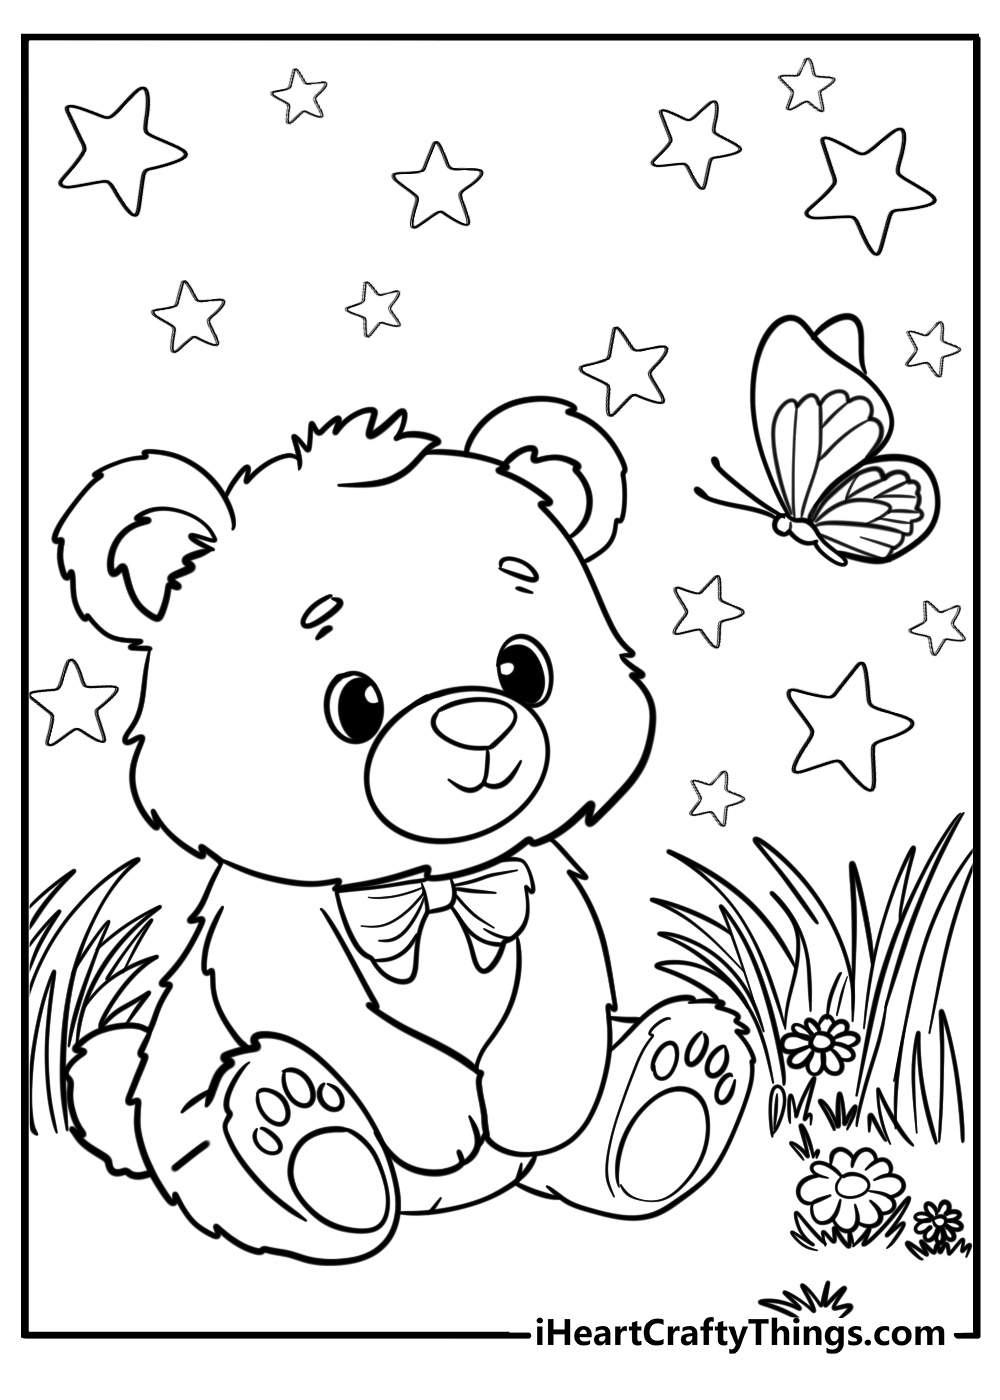 Cute bear coloring page sitting in grass with butterflies